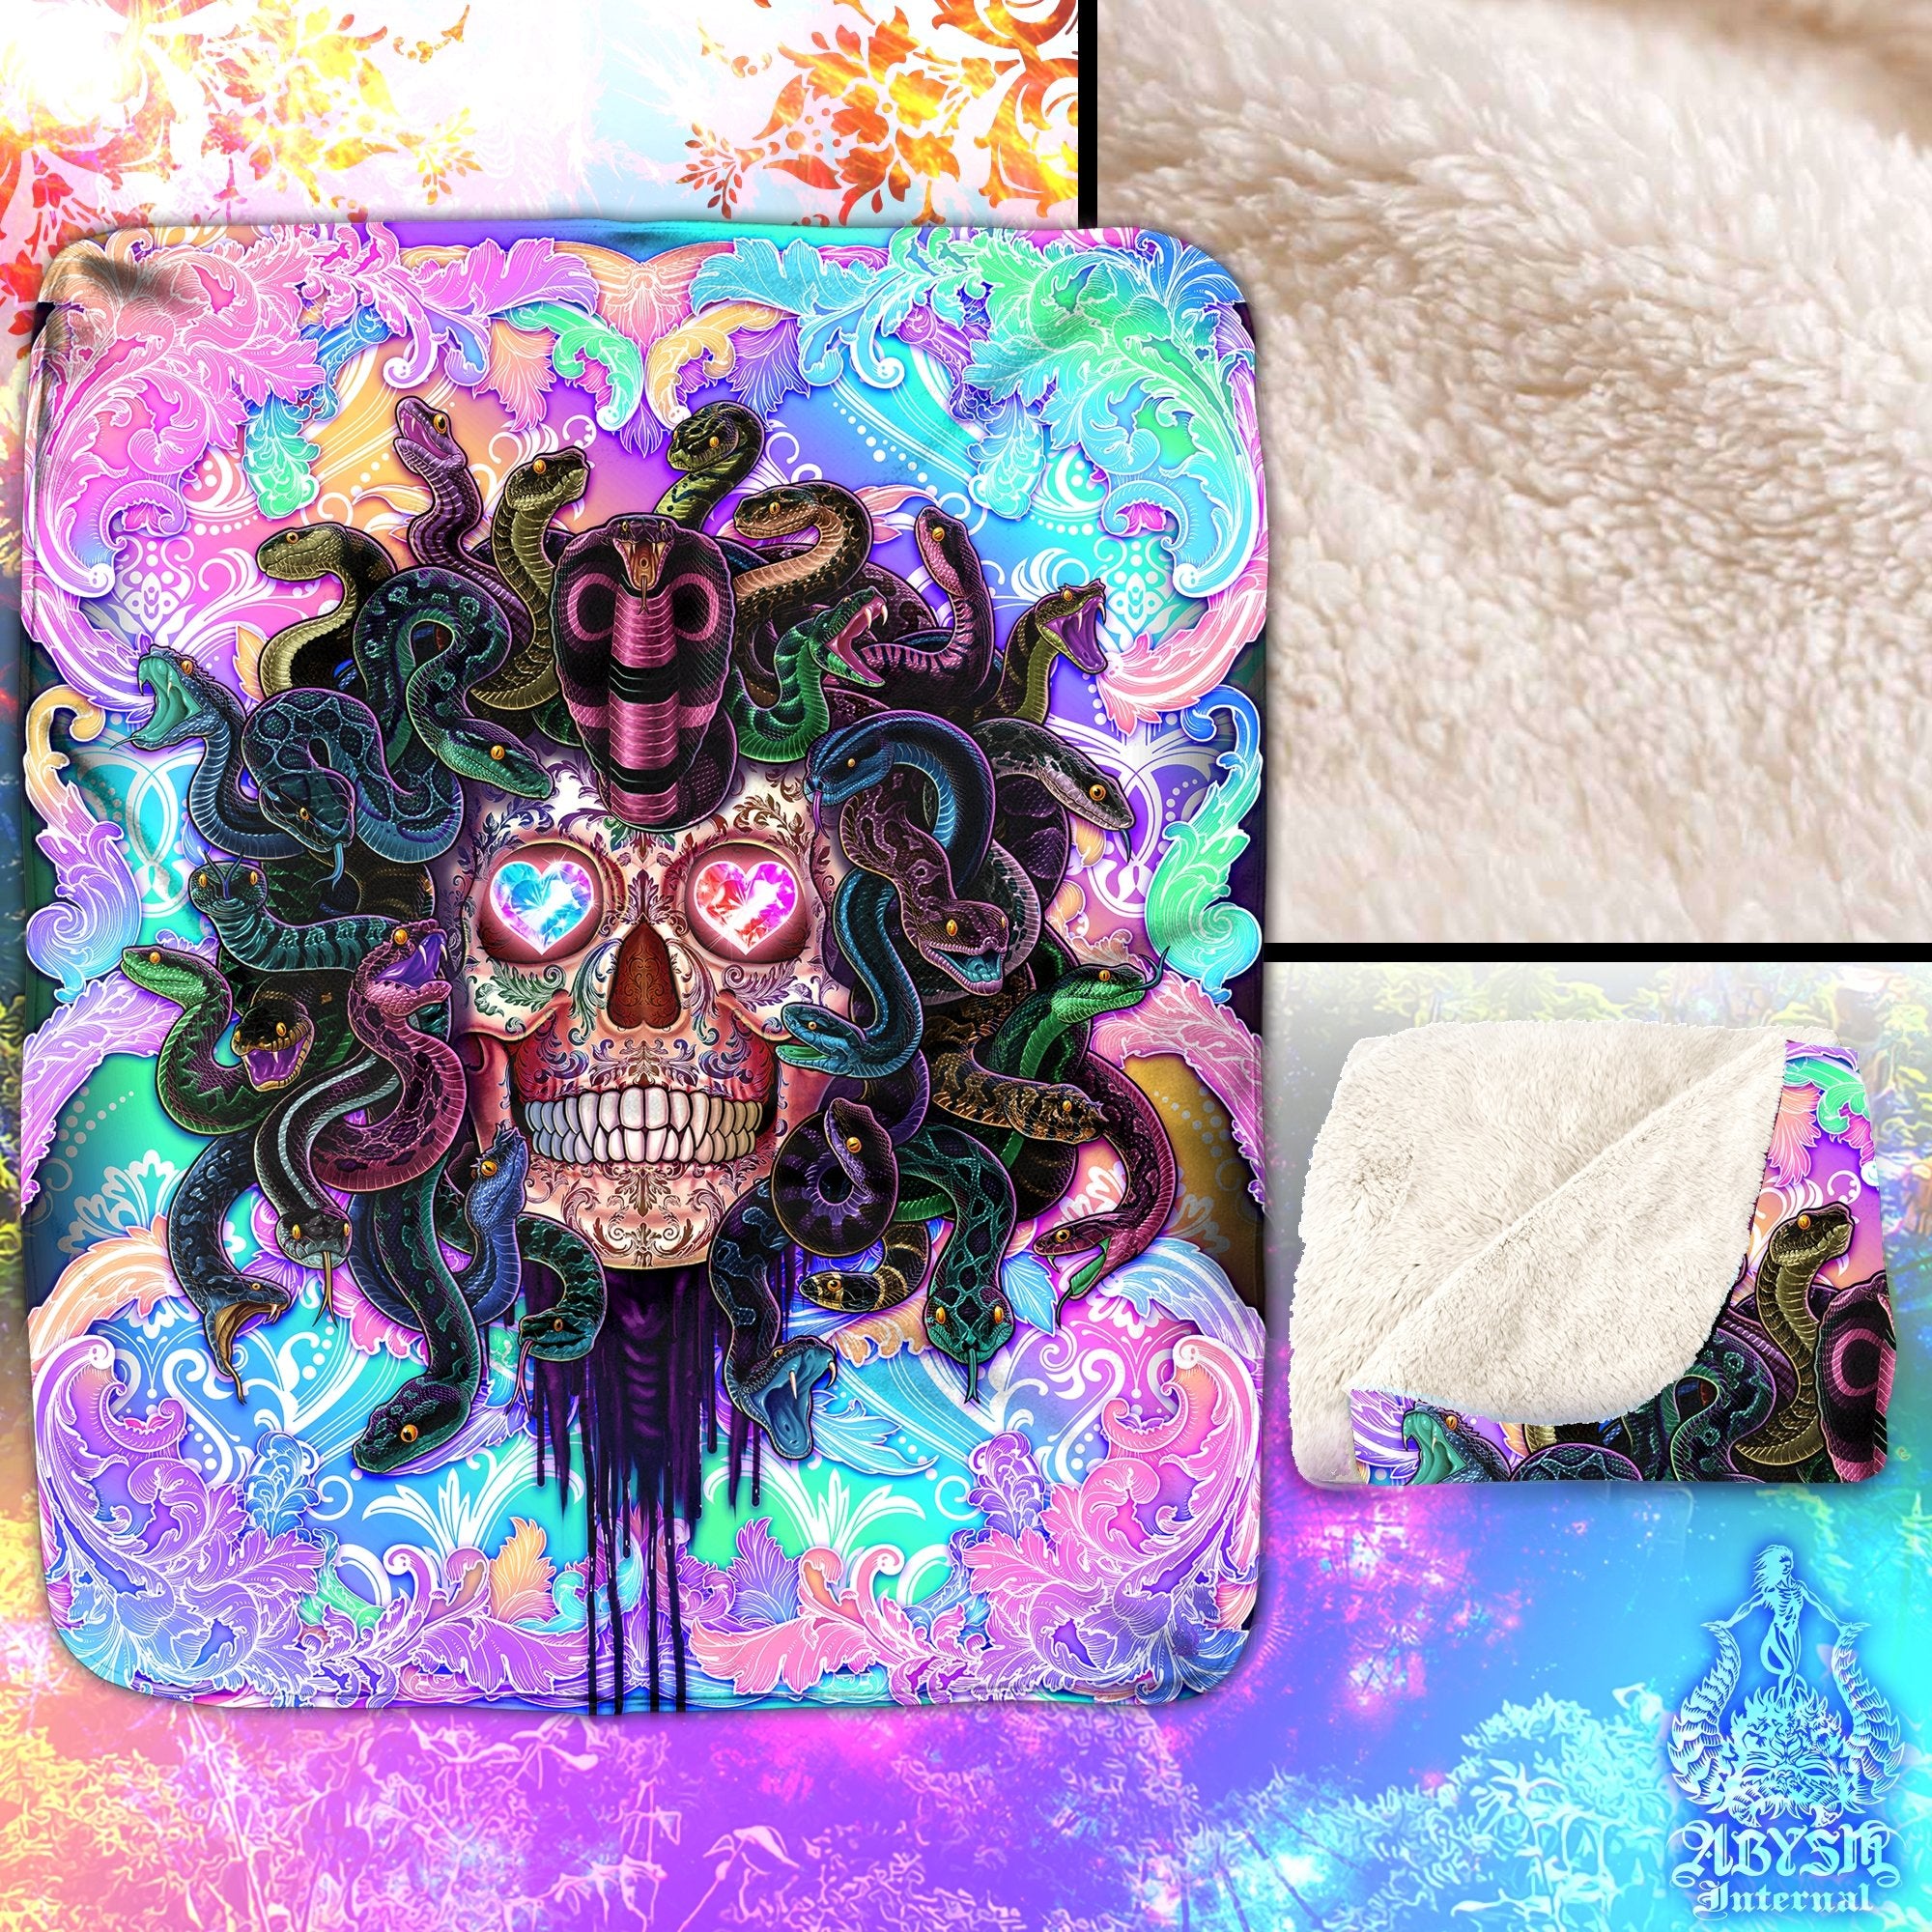 Psychedelic Skull Throw Fleece Blanket, Holographic Decor, Eclectic and Funky Gift - Aesthetic, Pastel Punk Black Medusa - Abysm Internal